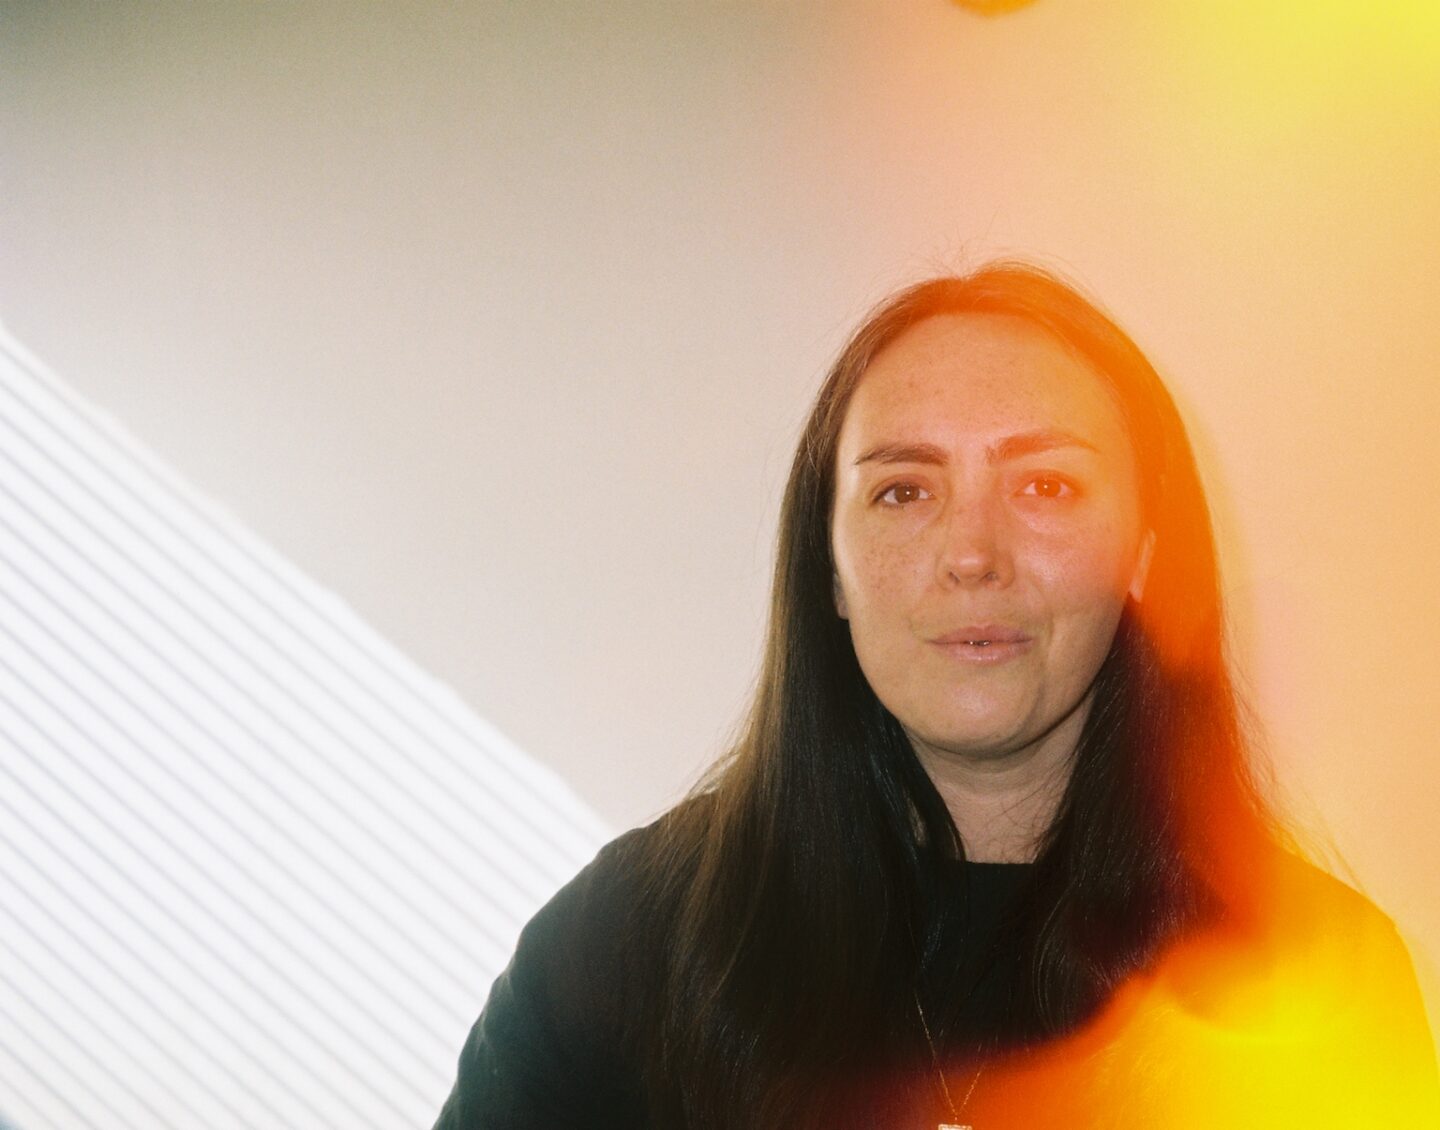 A middle-aged woman with long black hair looks directly at the camera, a yellow flare of light covering one side of her face and shoulder